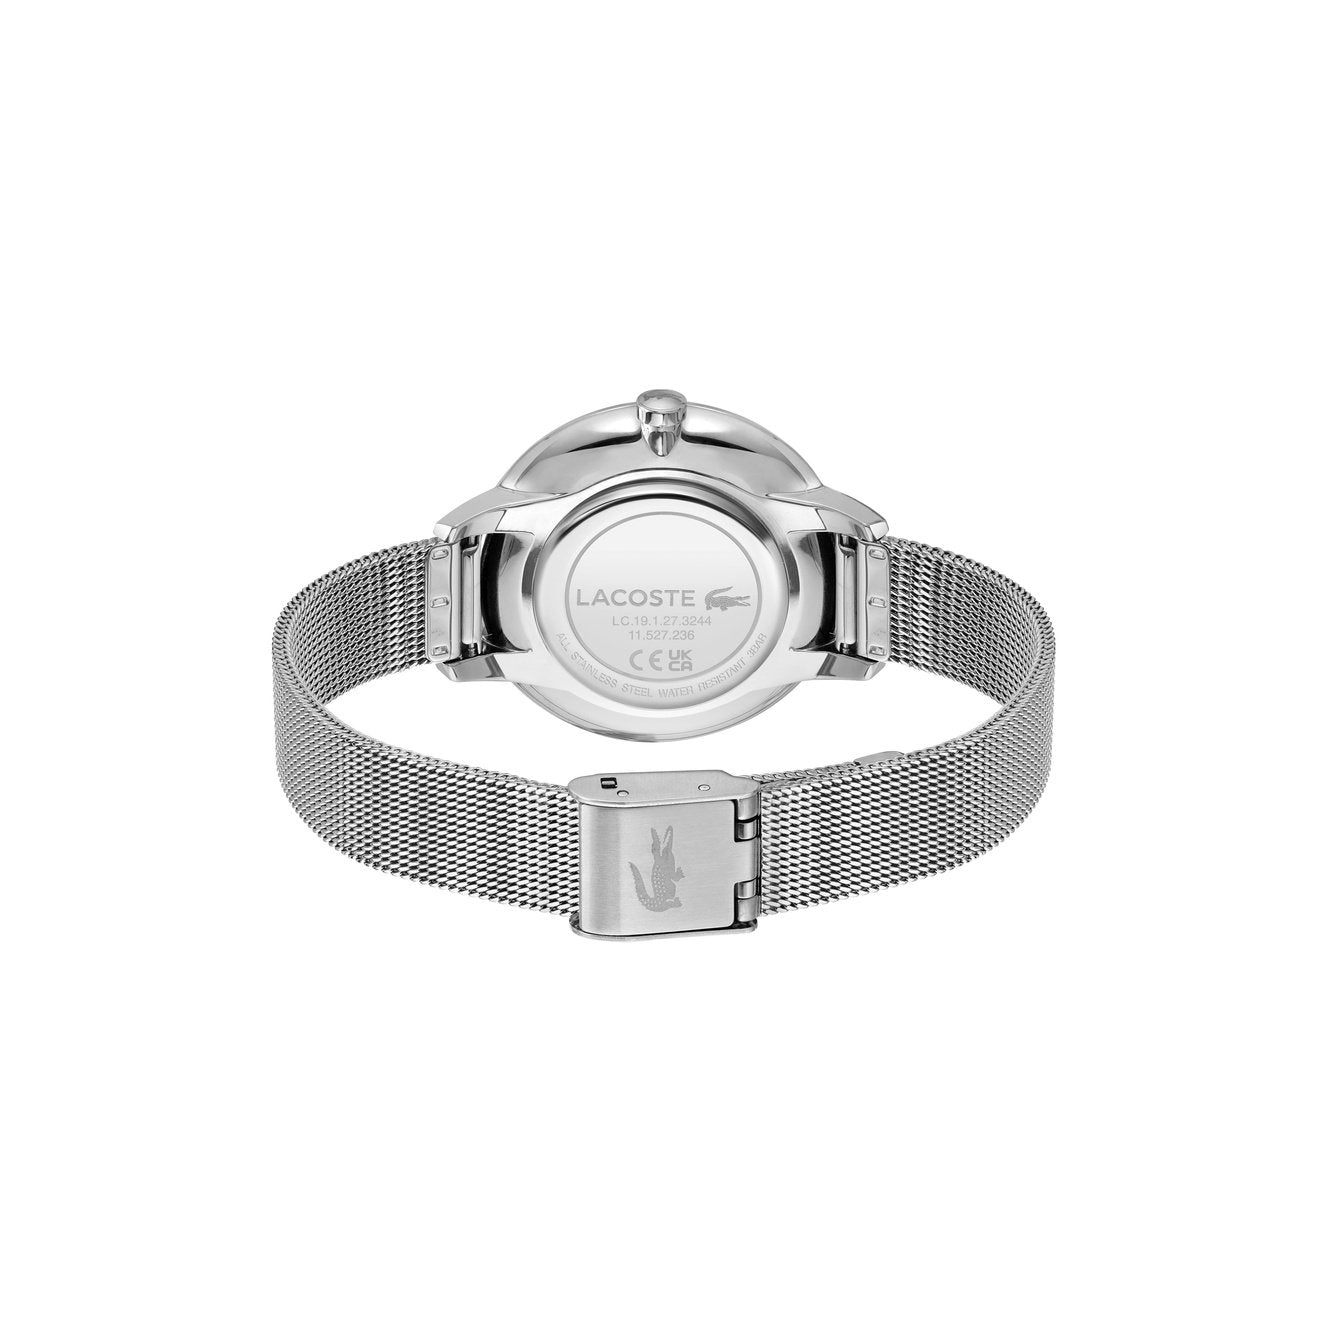 Ladies Cannes Watch 2001202 Lacoste